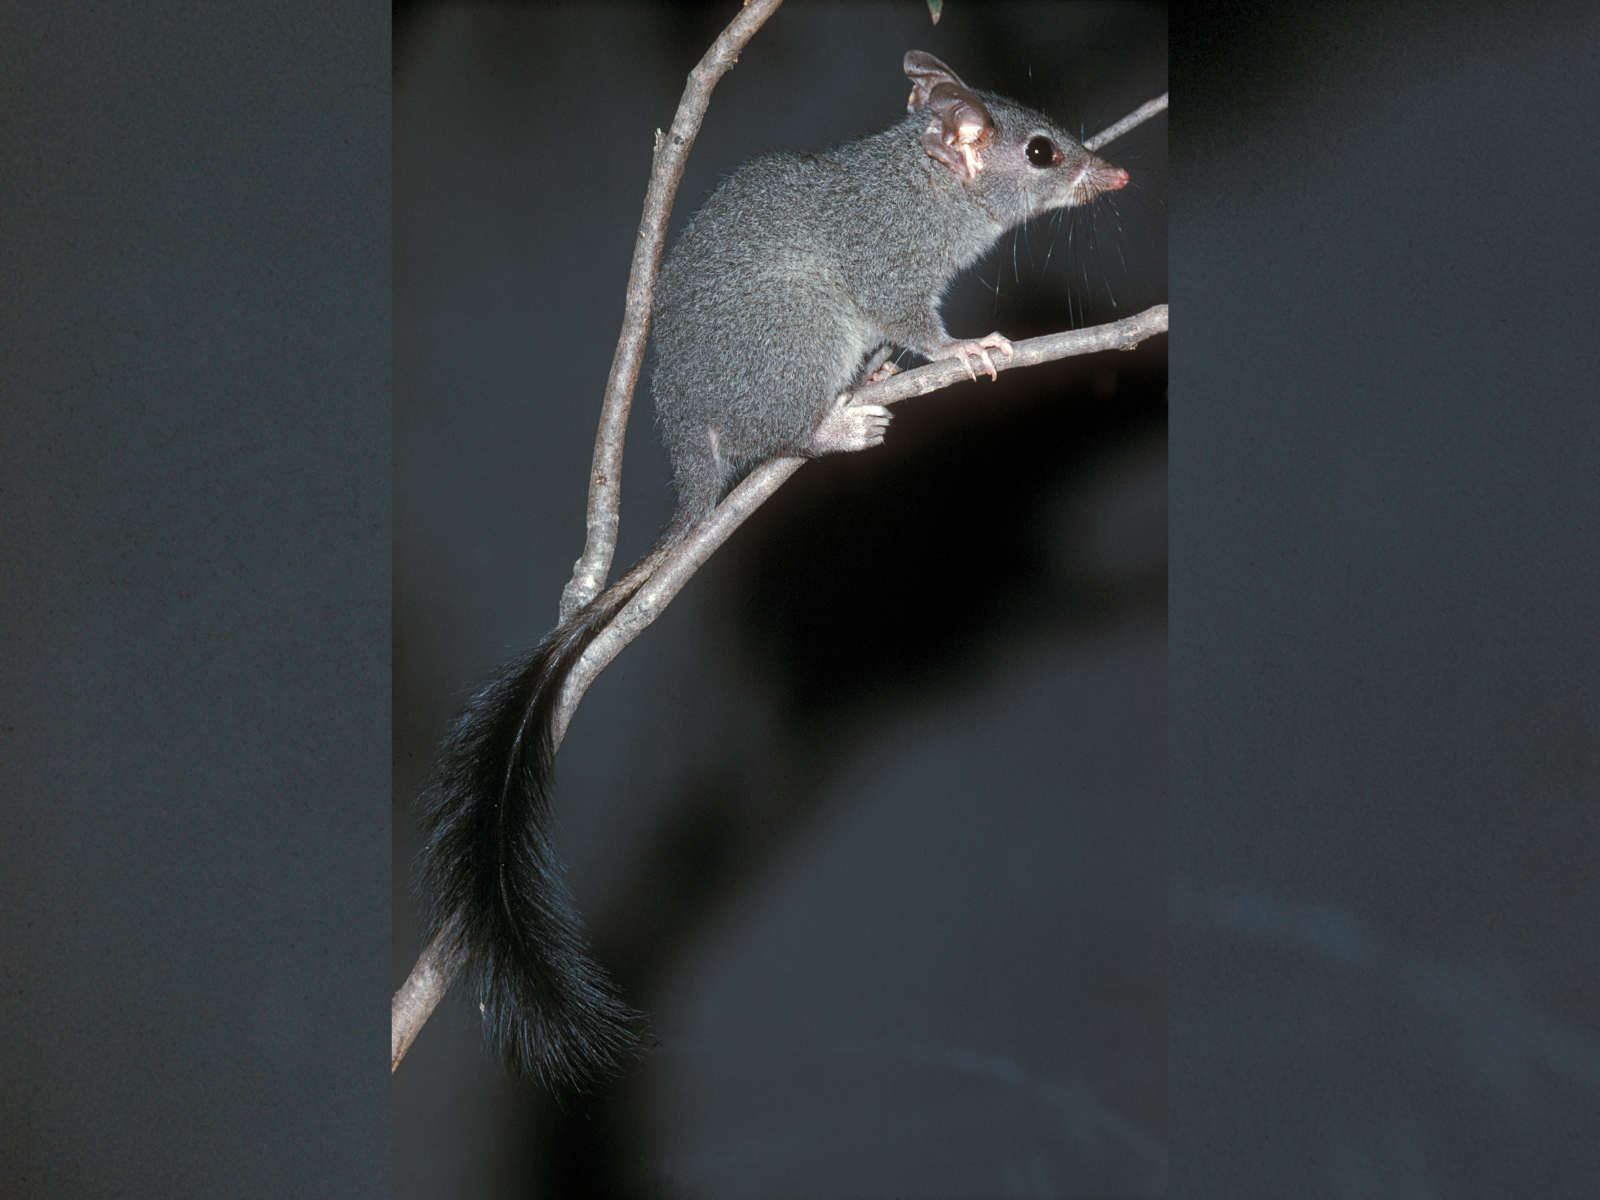 A Brush-tailed Phascogale lying in the branch of a tree. It look soft and has grey fur and a black brush like tail.